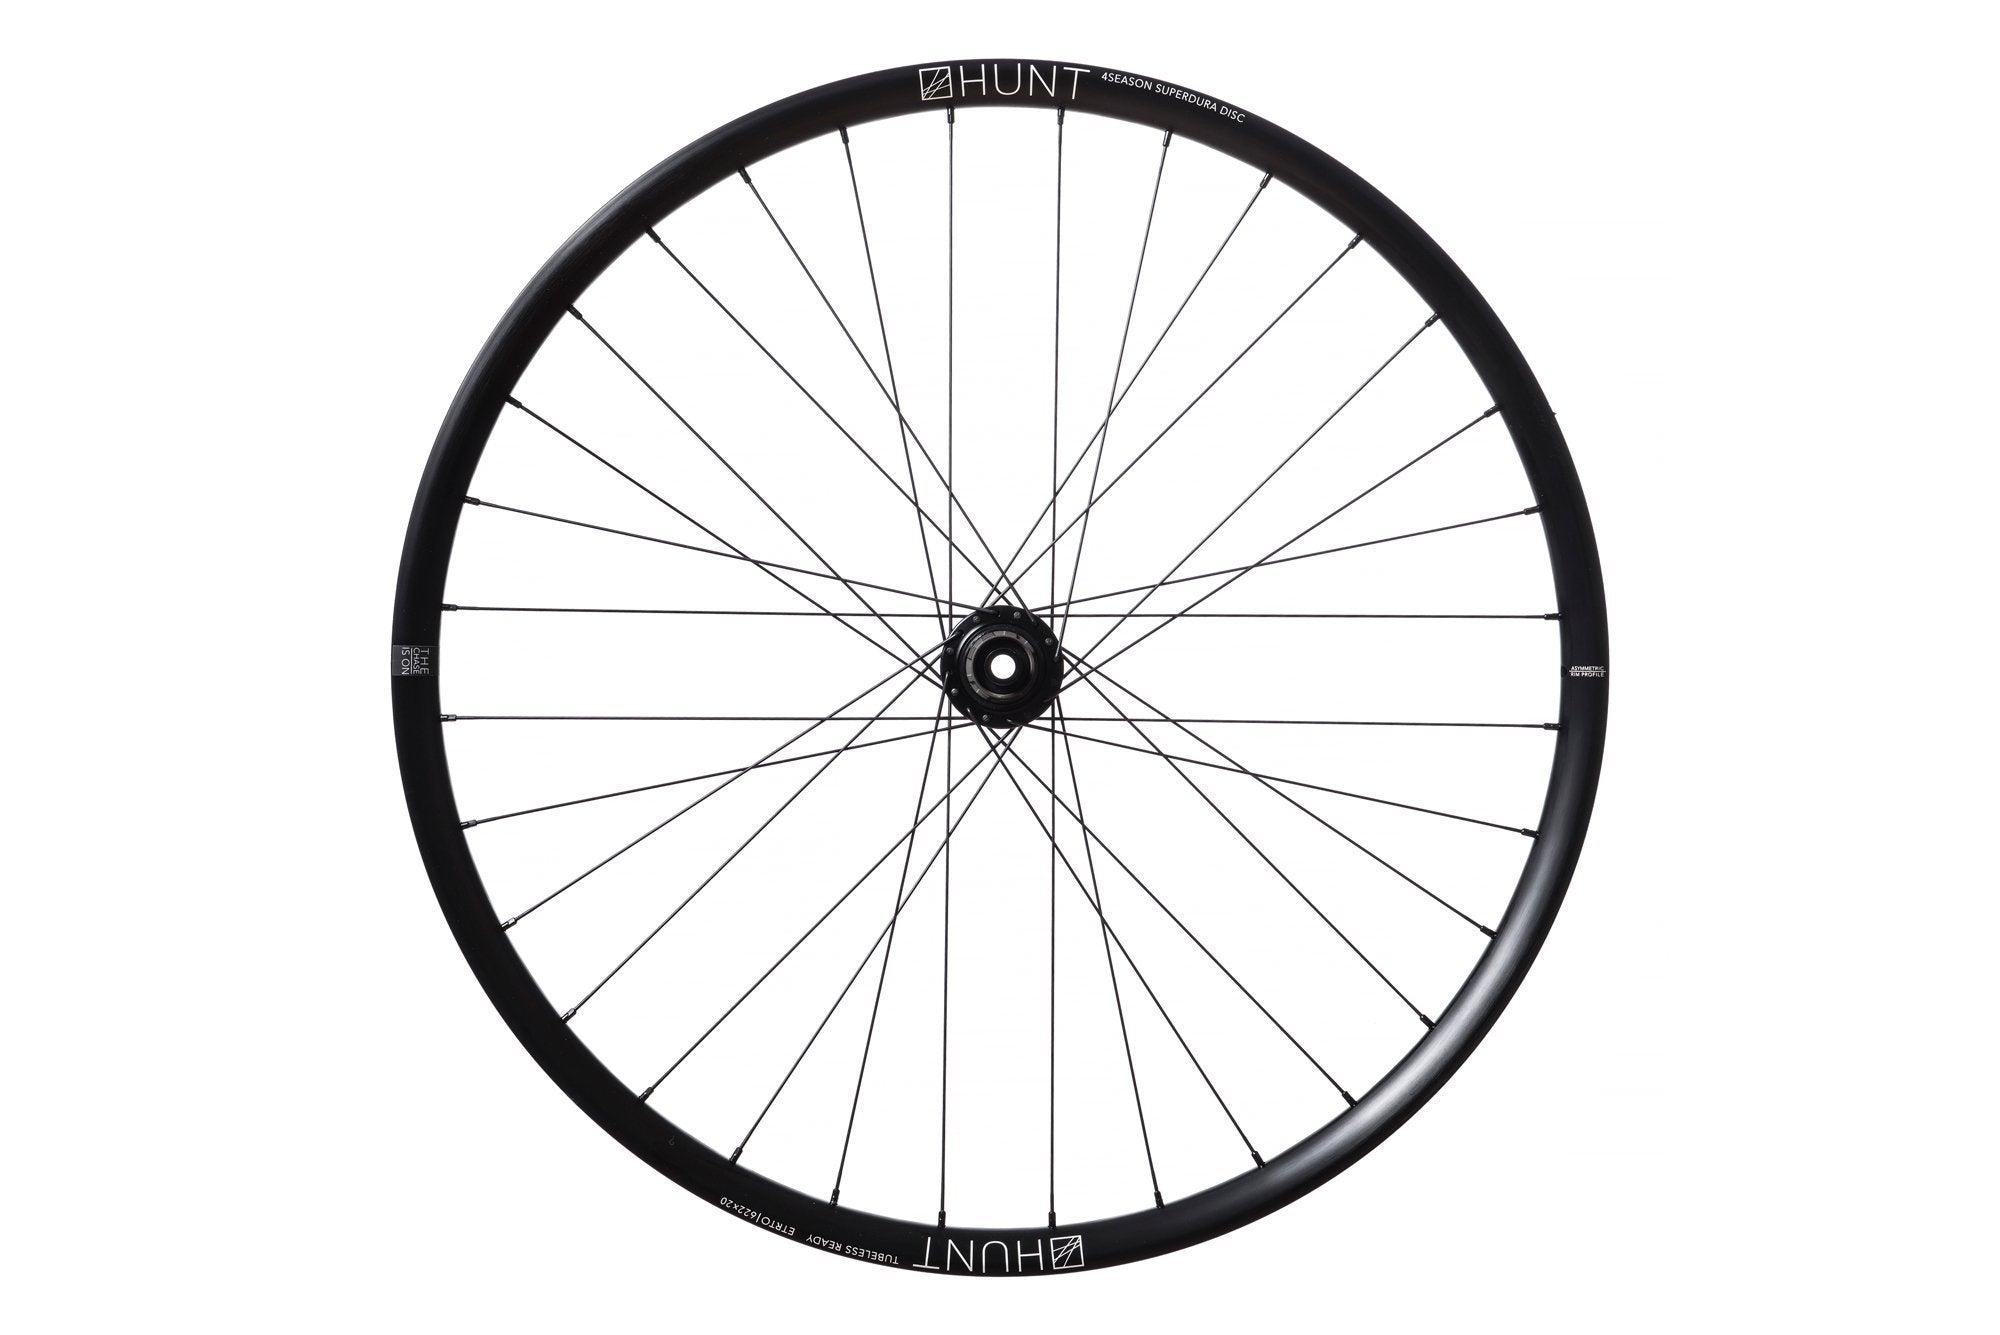 <h1>Spokes</h1><i>We chose the top-of-the-range Pillar Spoke Re-enforcement PSR XTRA models. These butted spokes are lighter and provide a greater degree of elasticity to maintain tensions and add fatigue resistance. These PSR J-bend spokes feature the 2.2 width at the spoke head providing more material in this high stress area. The nipples come with a square head so you can achieve precise tensioning. Combining these components well is key which is why all Hunt wheels are hand-built.</i>